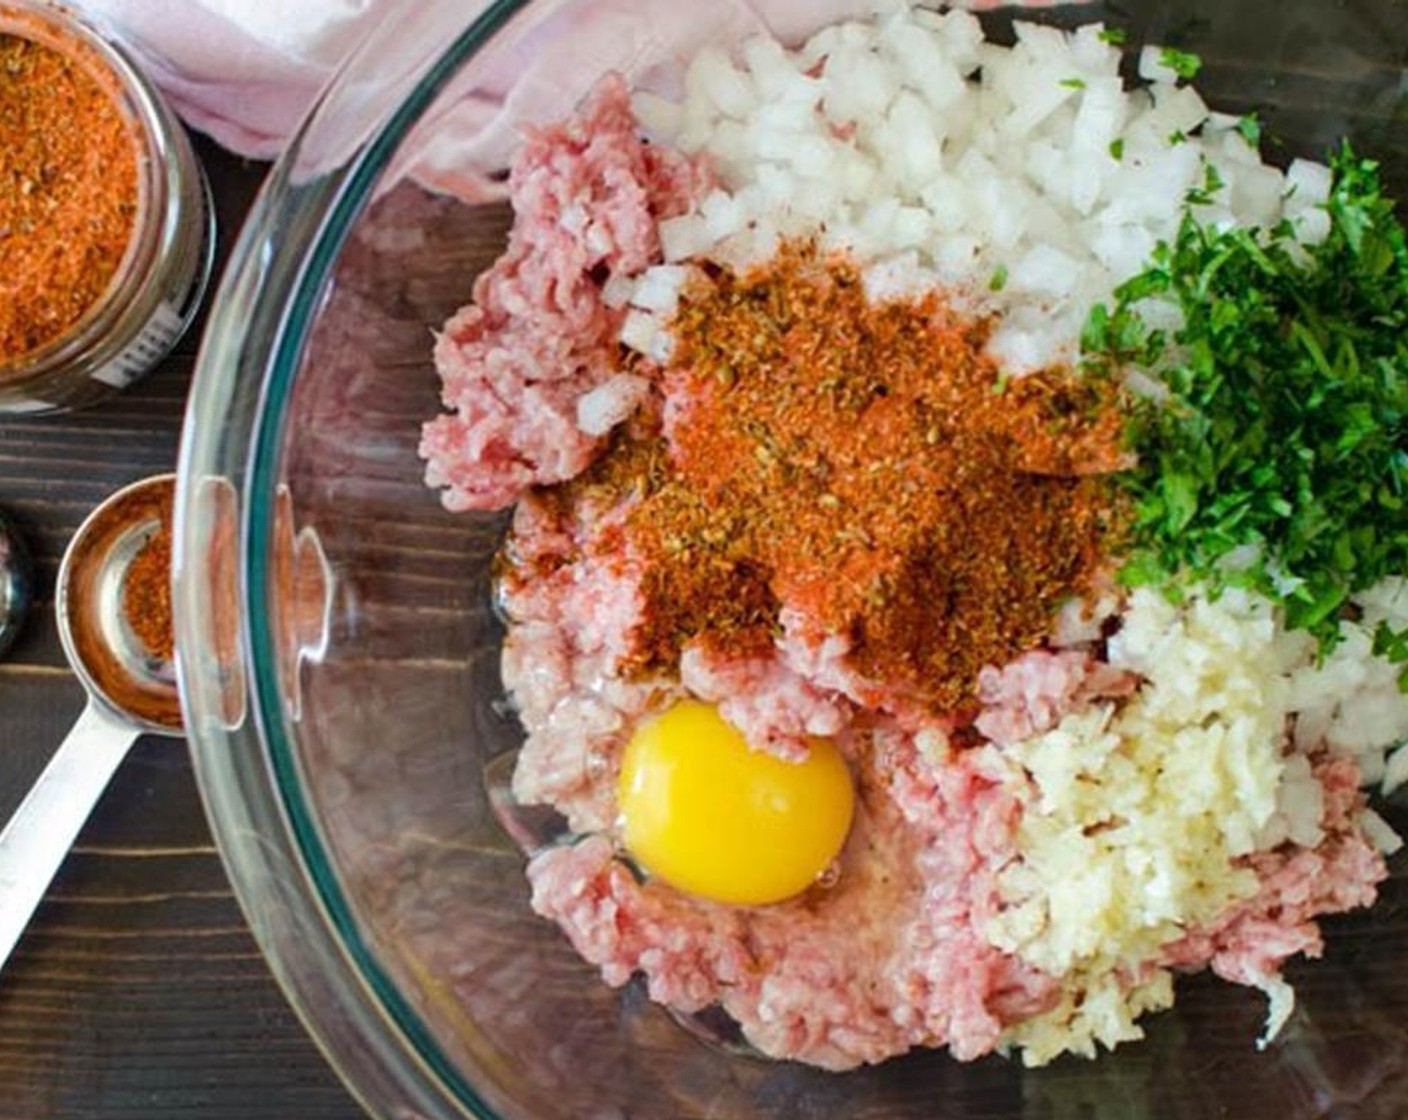 step 1 In a large bowl, combine the Ground Pork (1 lb), Onion (1), Garlic (1 clove), Fresh Parsley (2 Tbsp), Cajun Seasoning (1 Tbsp), and Egg (1). Mix thoroughly with your hands.